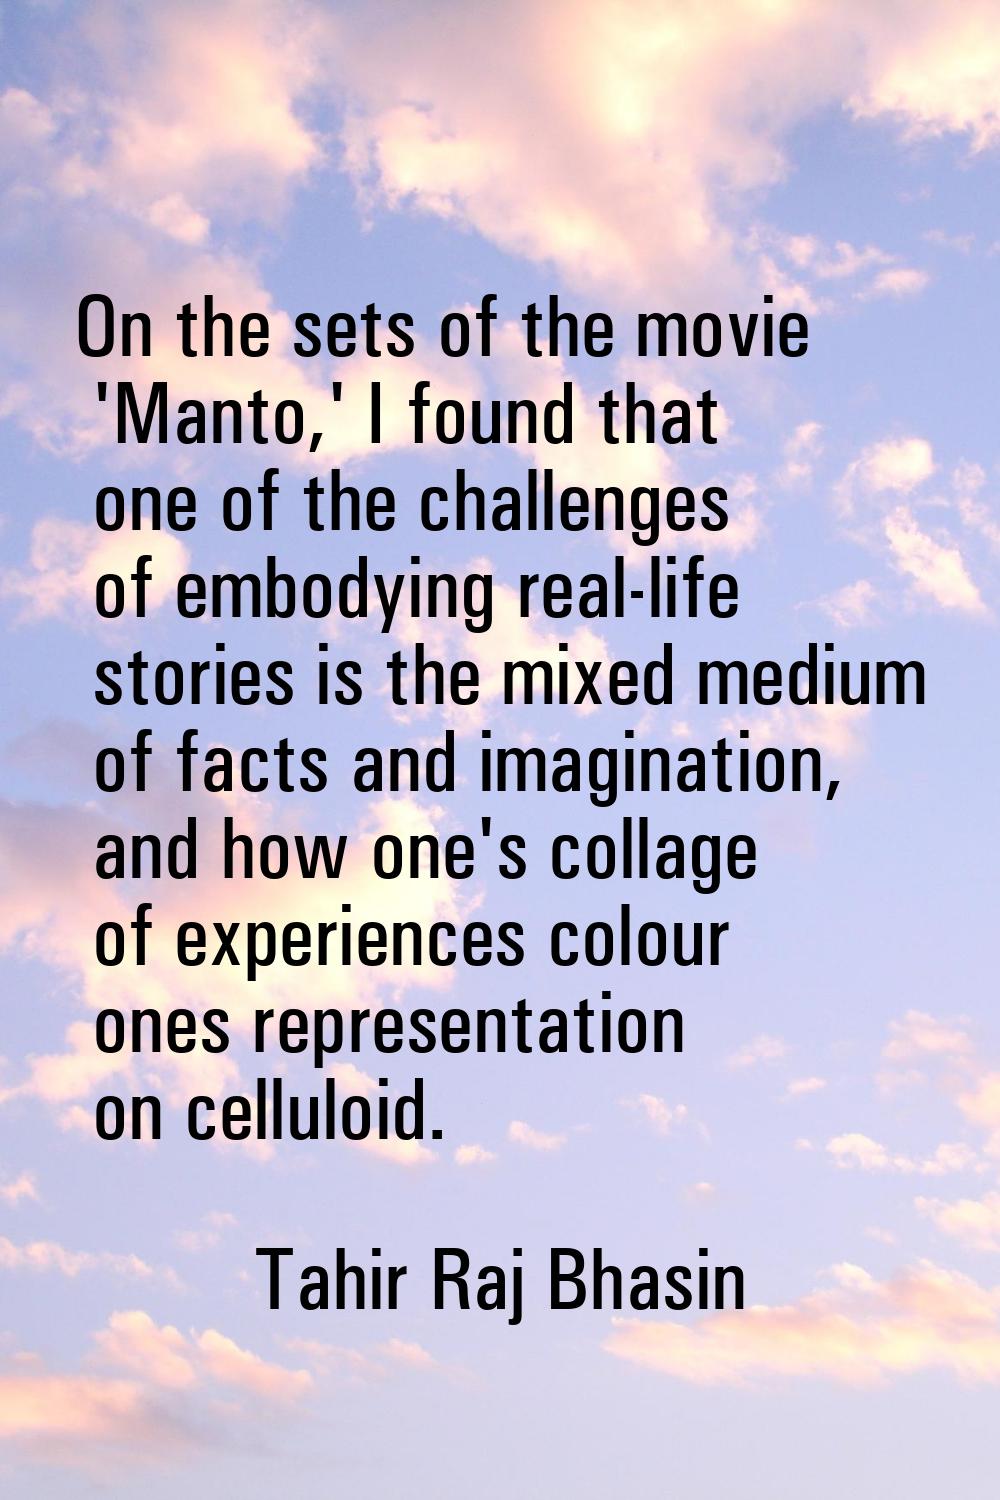 On the sets of the movie 'Manto,' I found that one of the challenges of embodying real-life stories